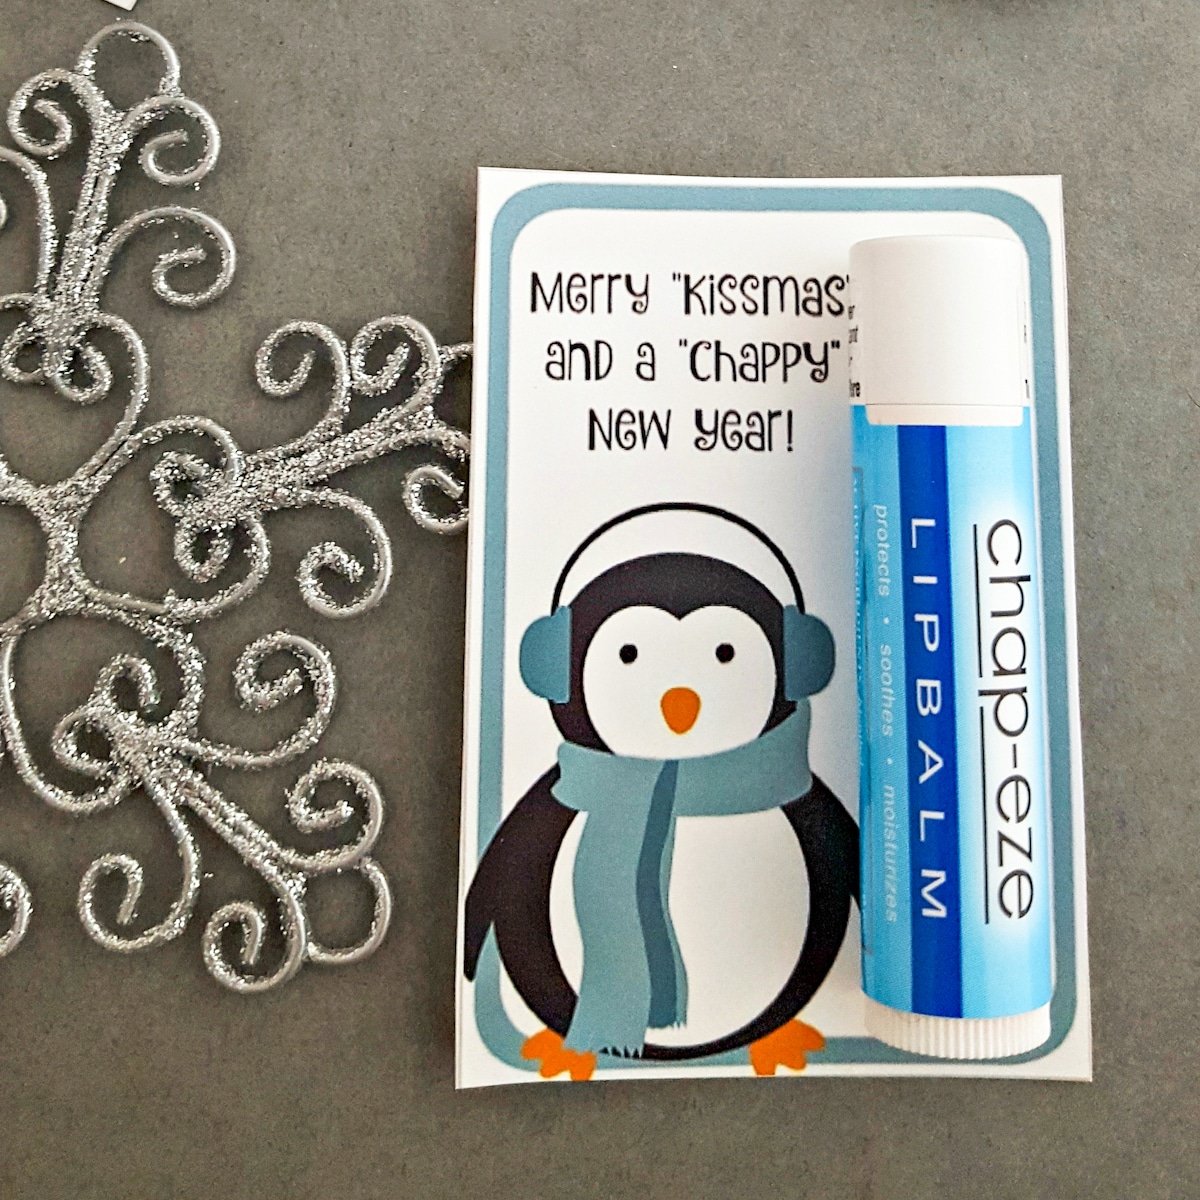 DIY Chapstick Gift Idea with Printable Card.